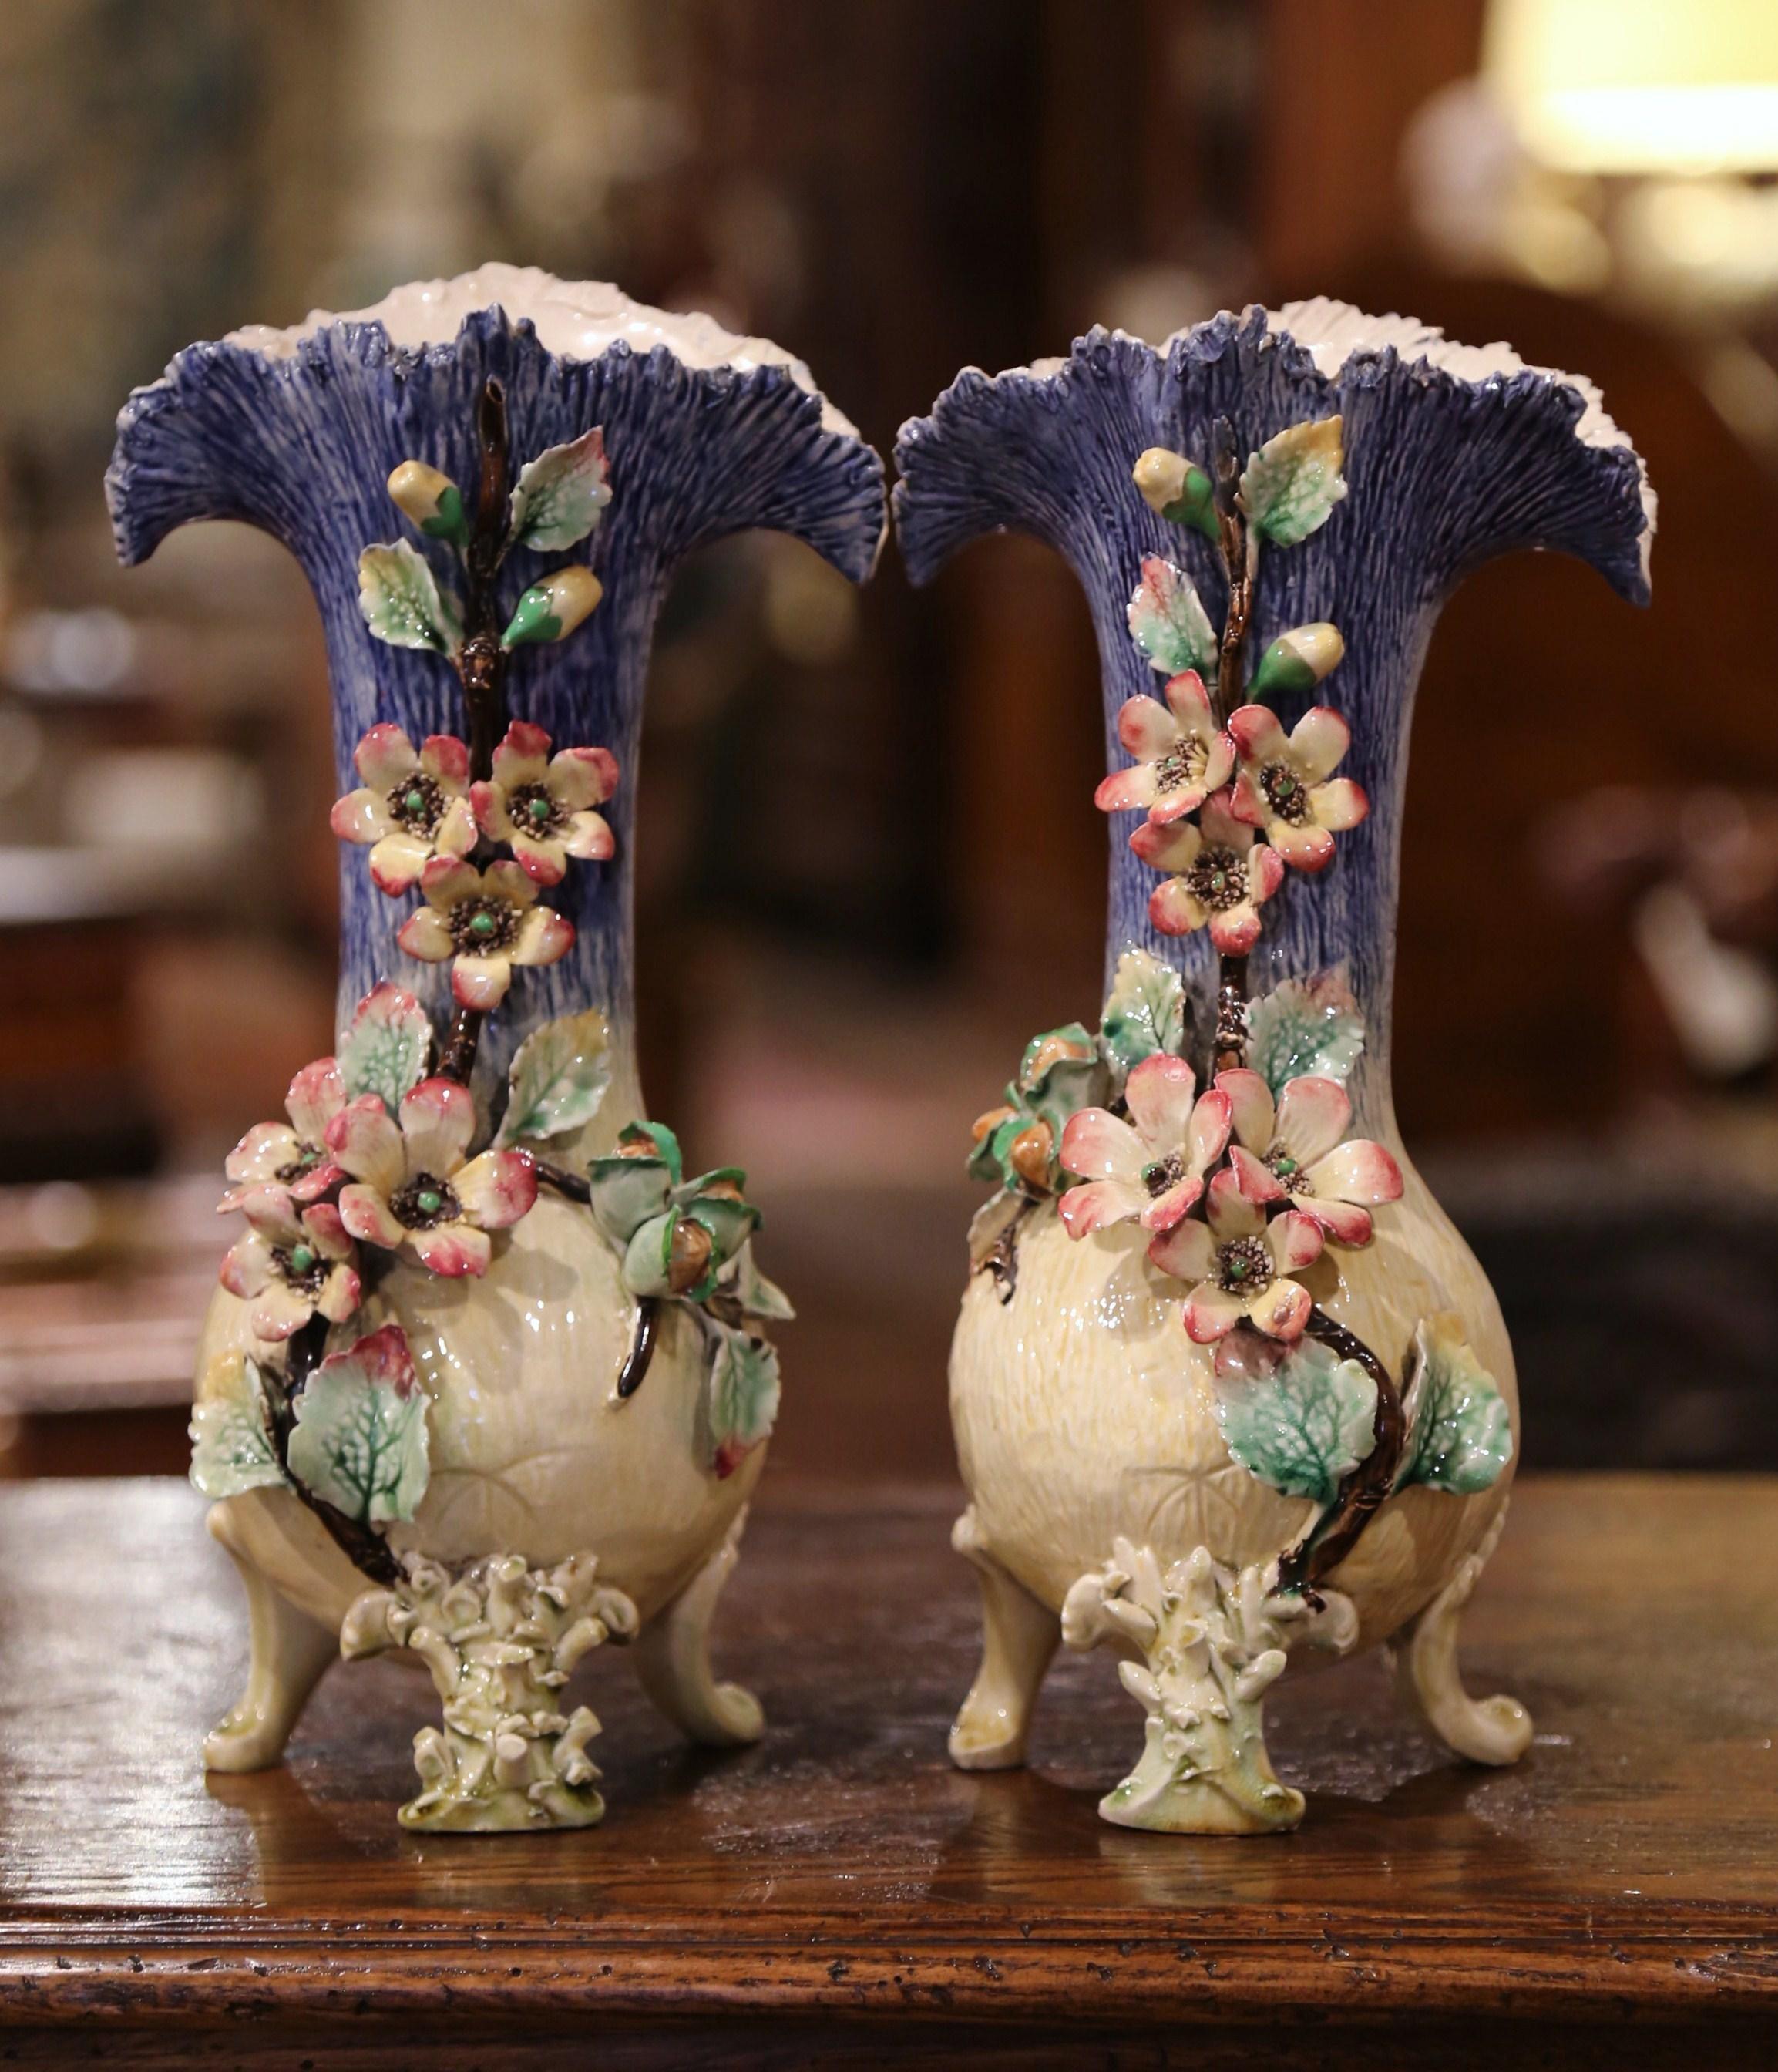 Faience Pair of 19th Century French Painted Ceramic Barbotine Vases with Floral Motifs